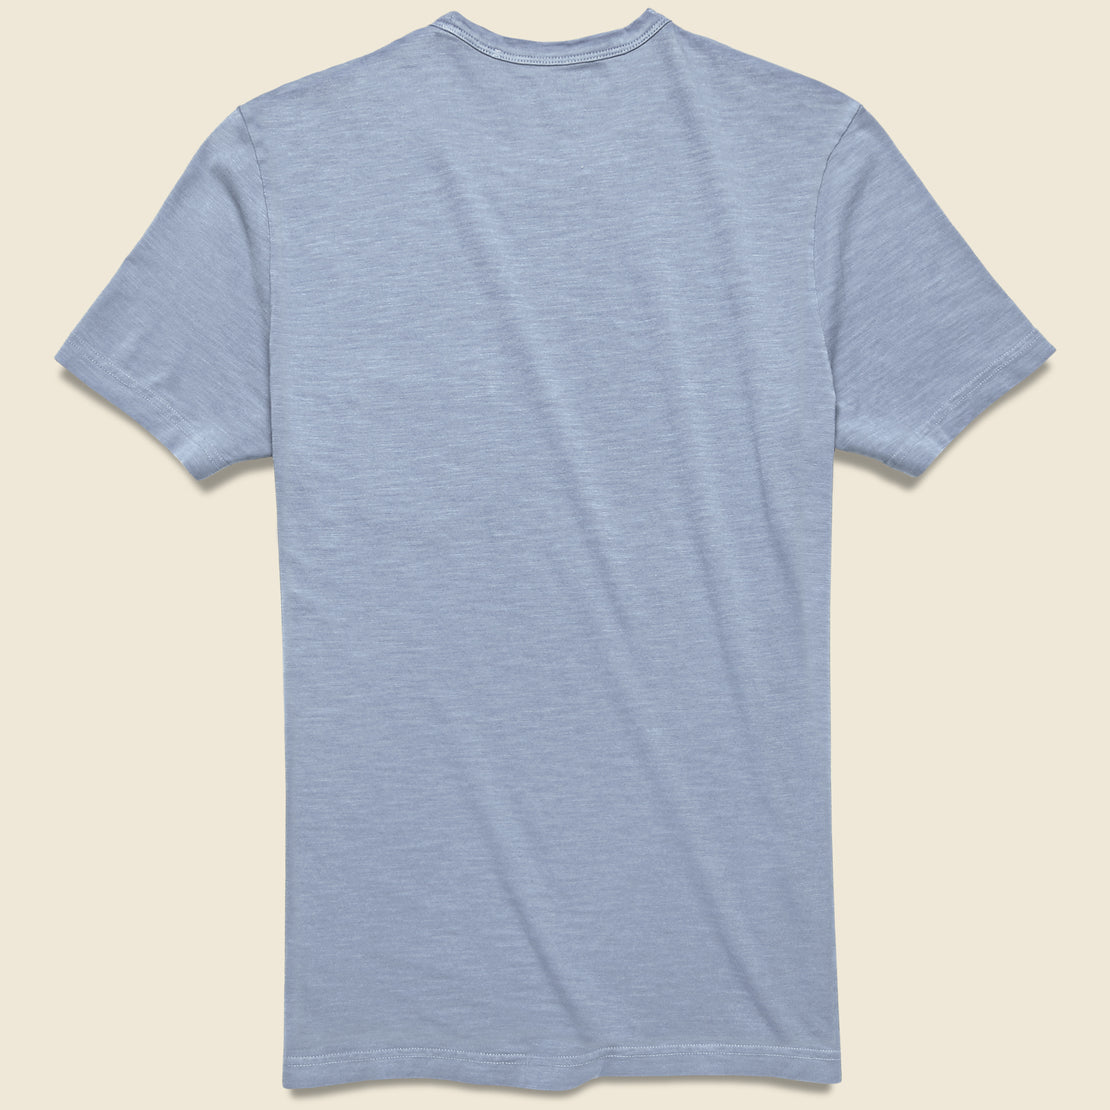 Garment Dyed Pocket Tee - Typhoon Blue - Faherty - STAG Provisions - Tops - S/S Tee